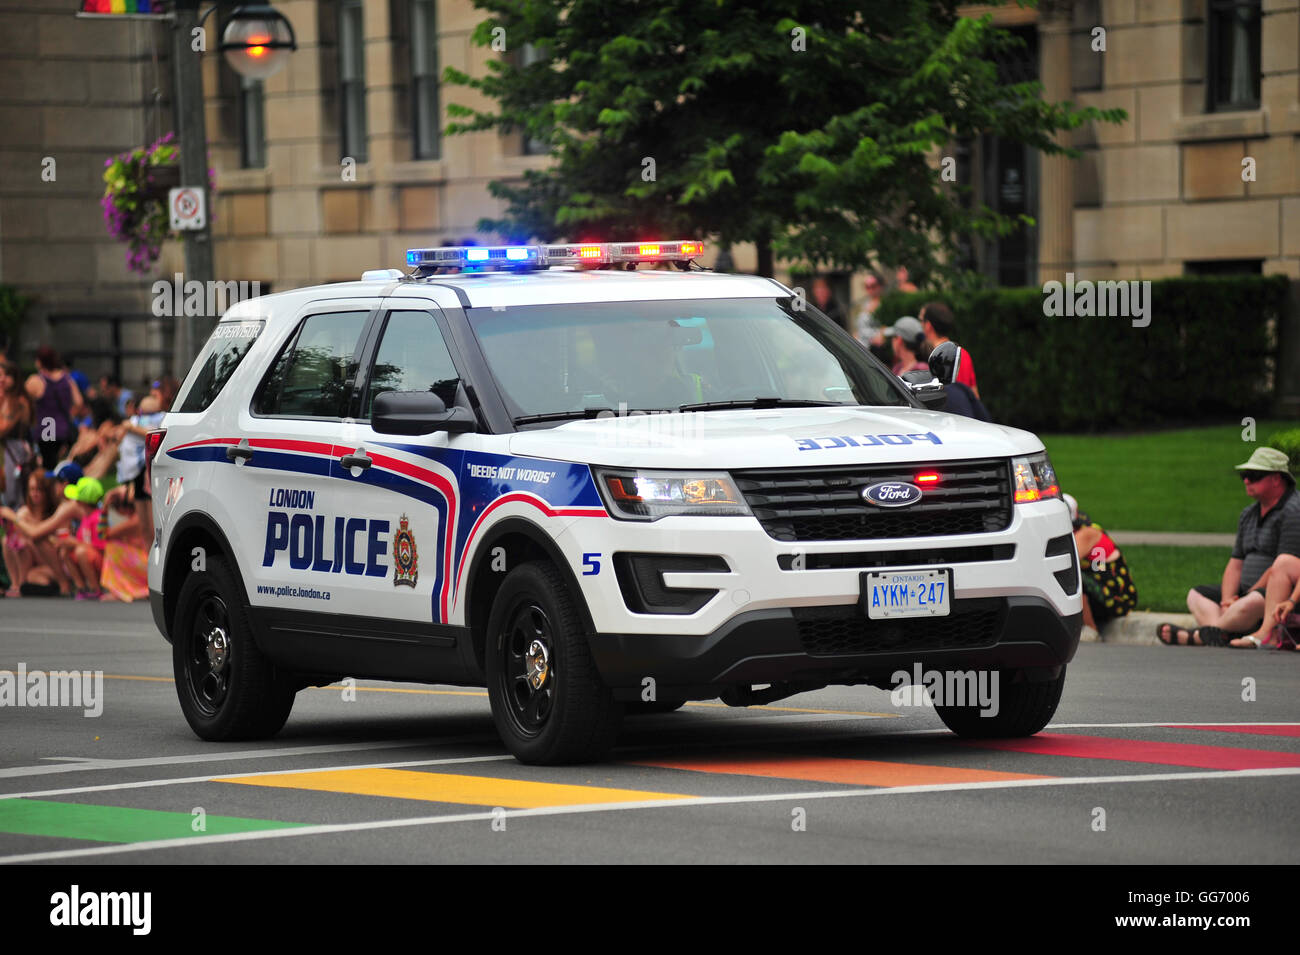 A Police car participating in a Pride parade in the Canadian city of London, Ontario. Stock Photo